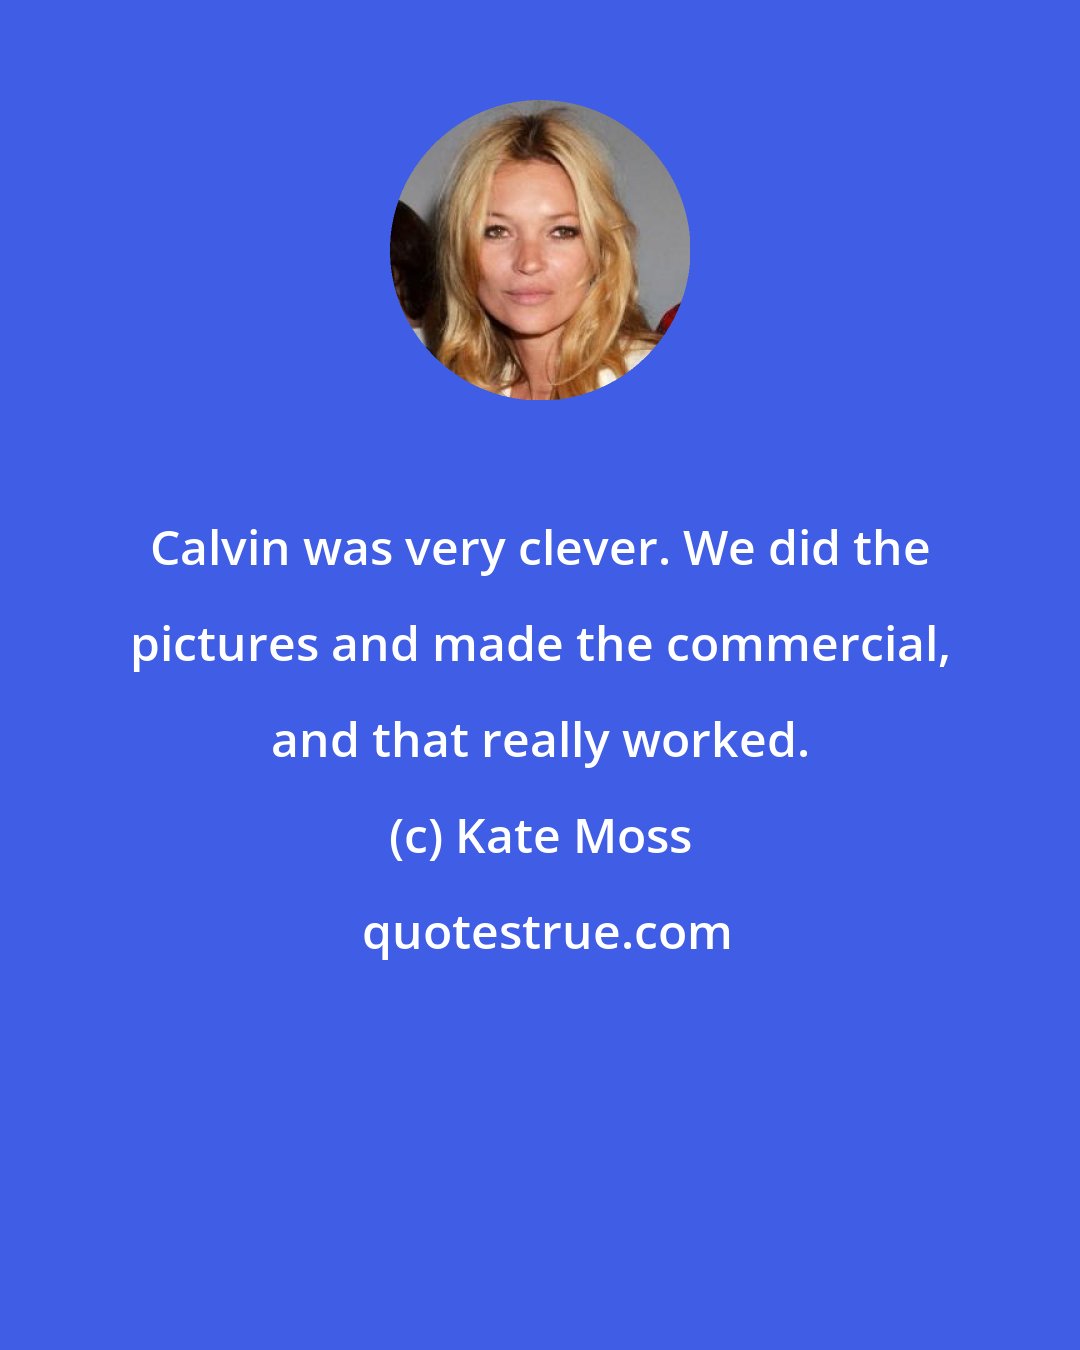 Kate Moss: Calvin was very clever. We did the pictures and made the commercial, and that really worked.